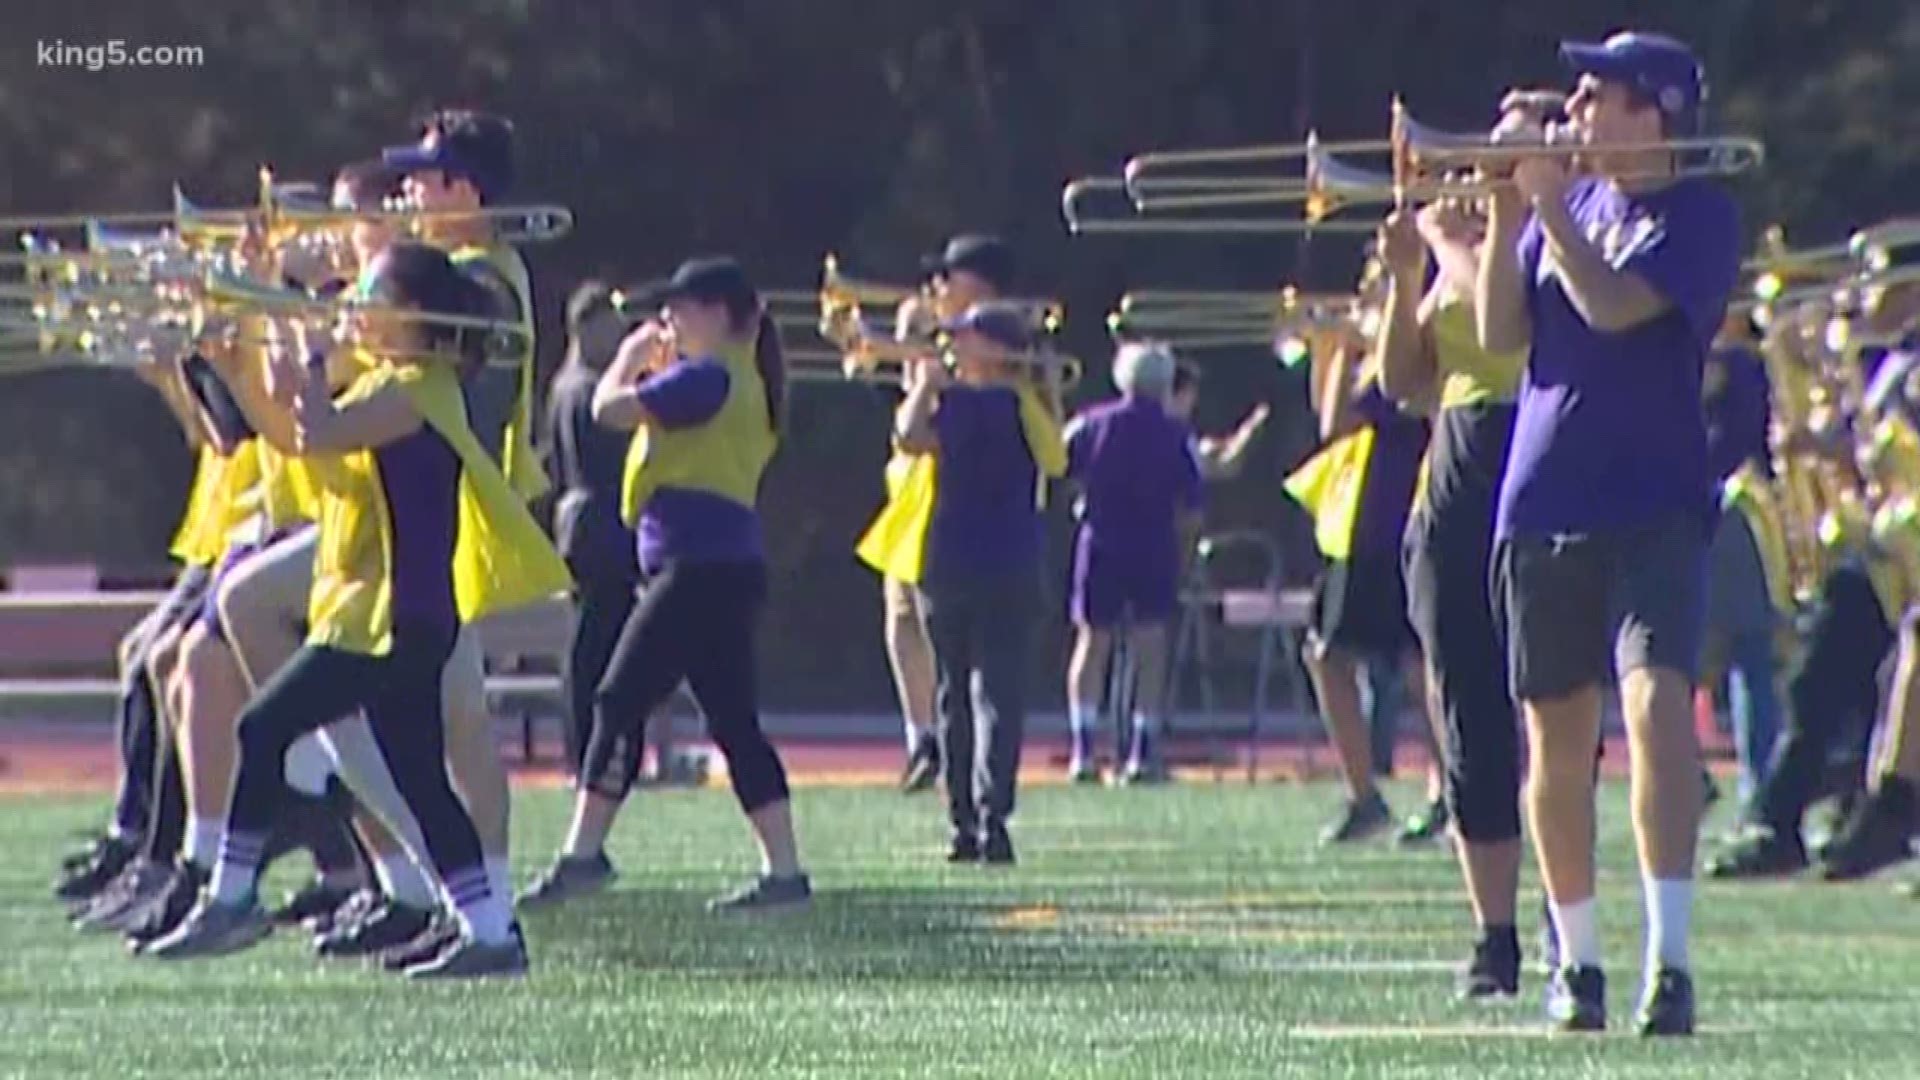 The UW marching band practiced on the field in Glendale ahead of Rose Bowl performances and festivities.